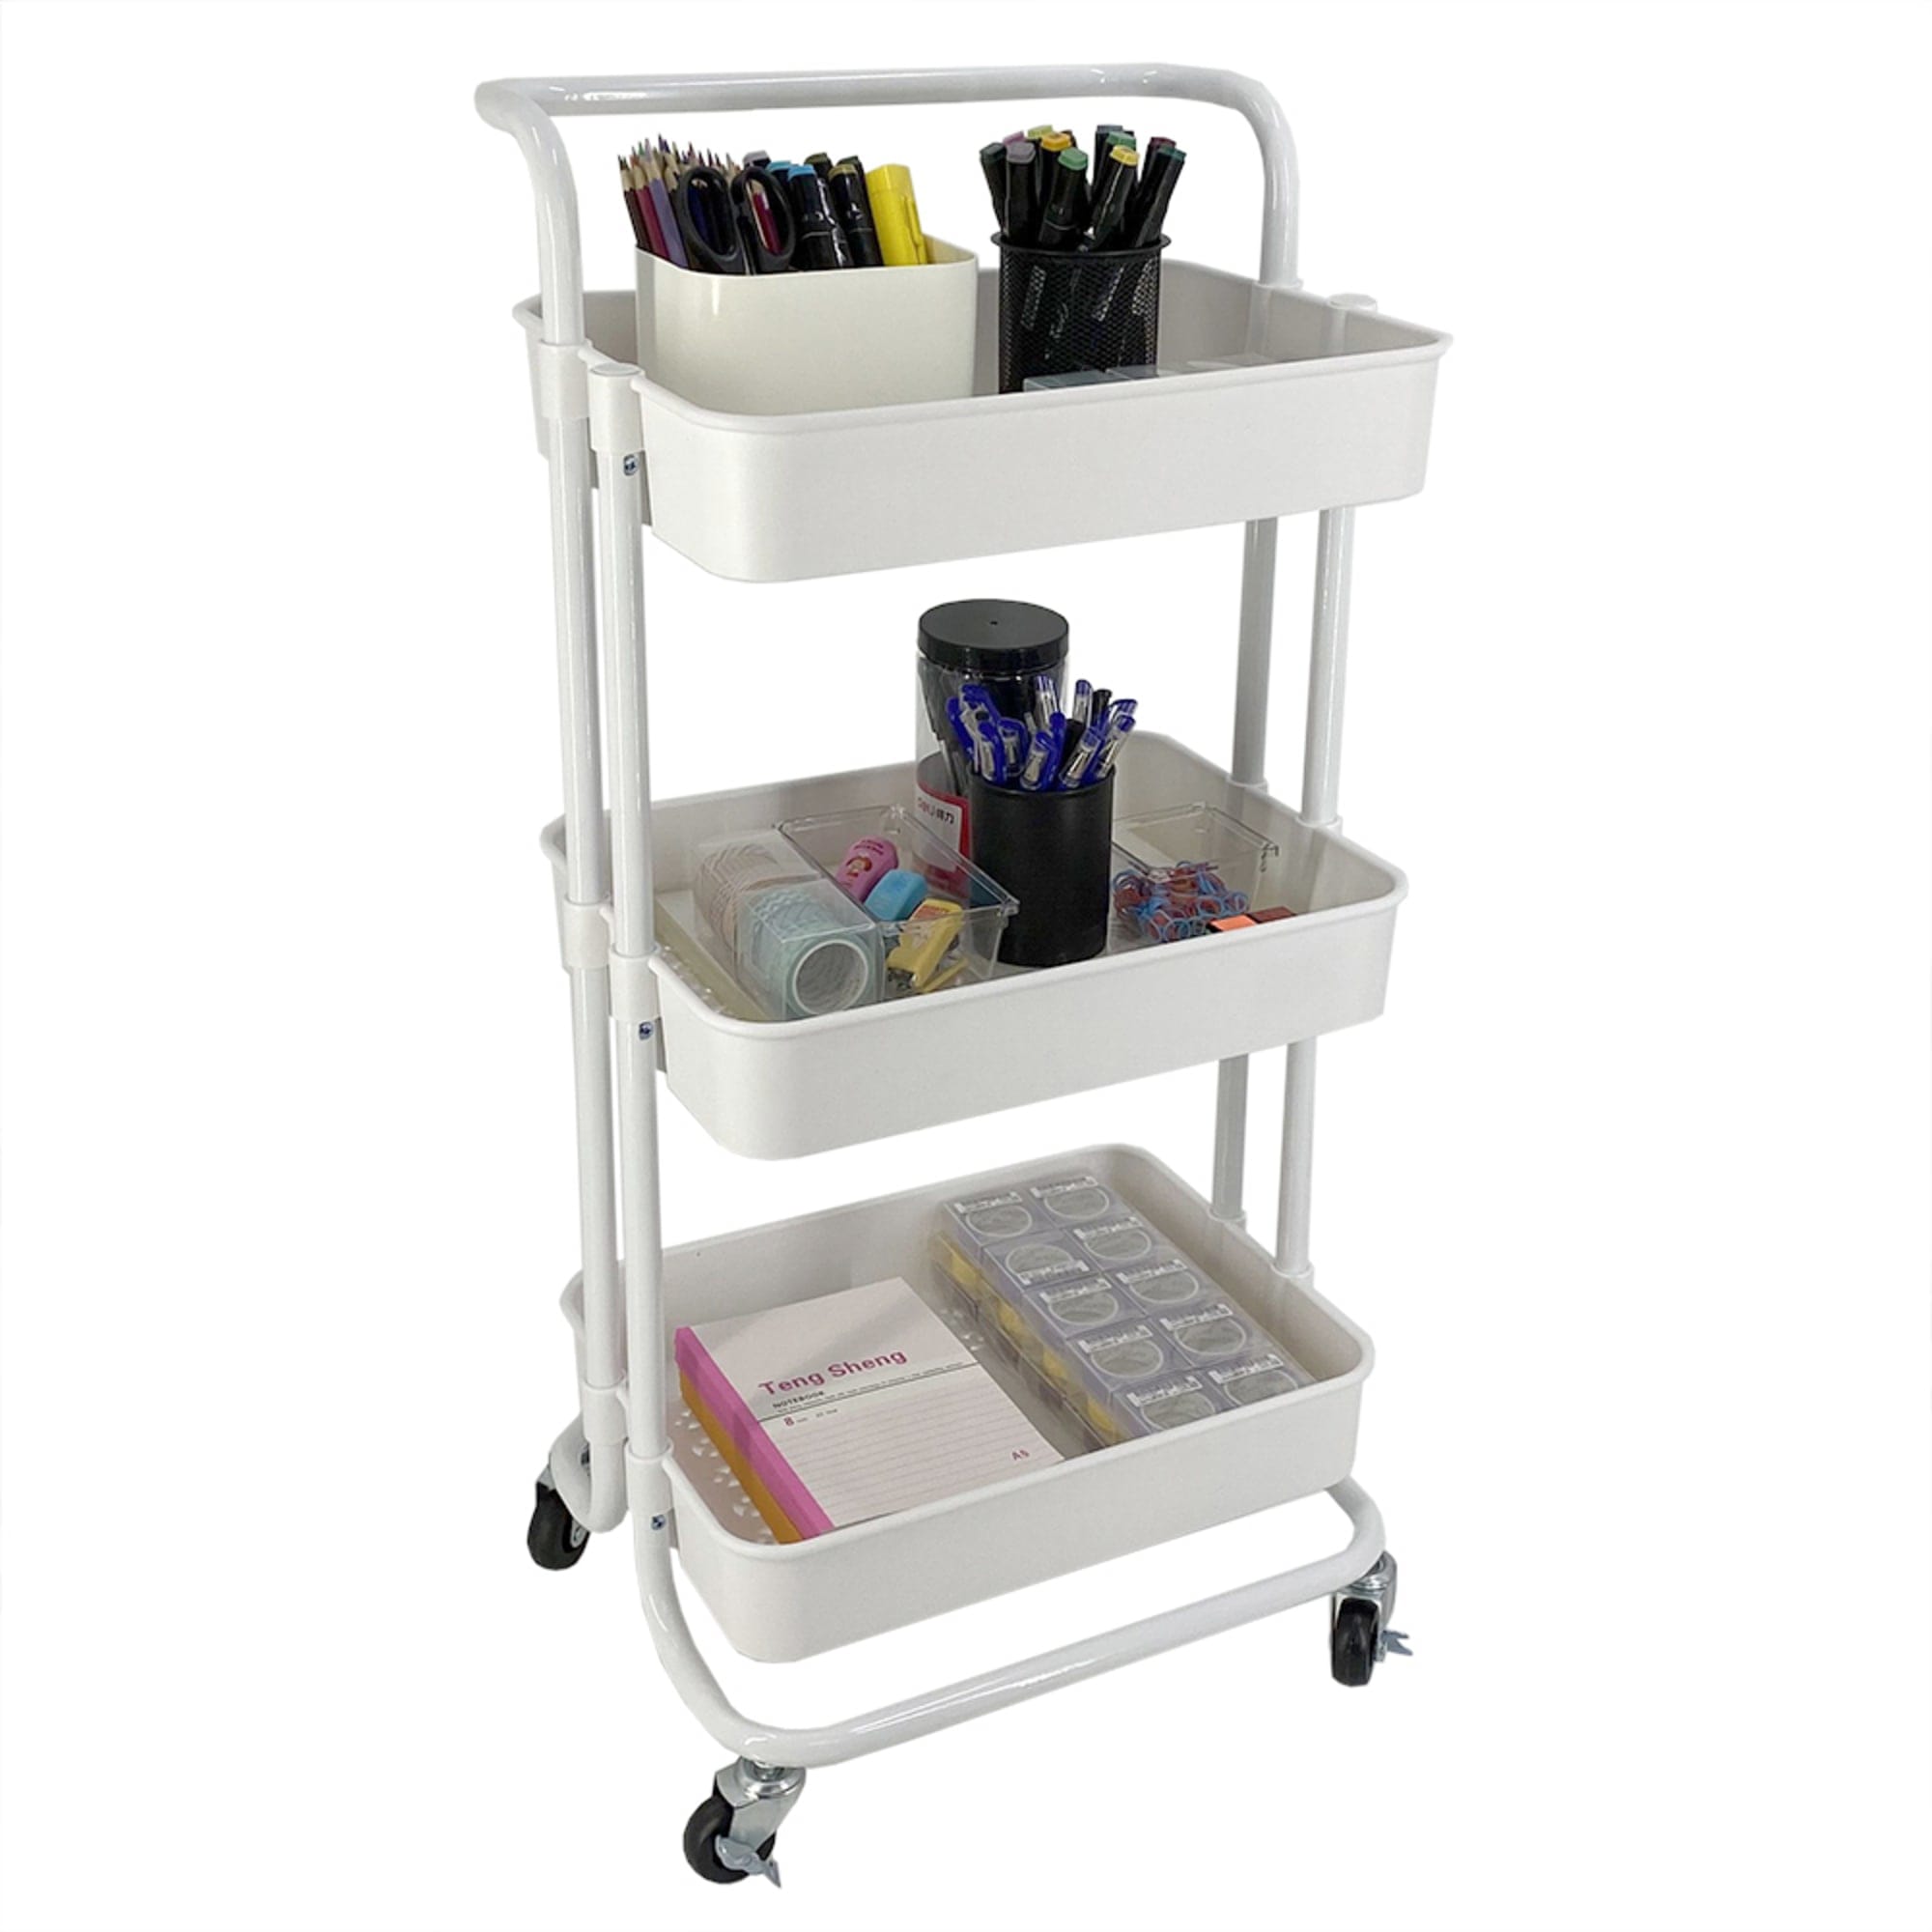 rolling shelves for pantry (lockable wheels)